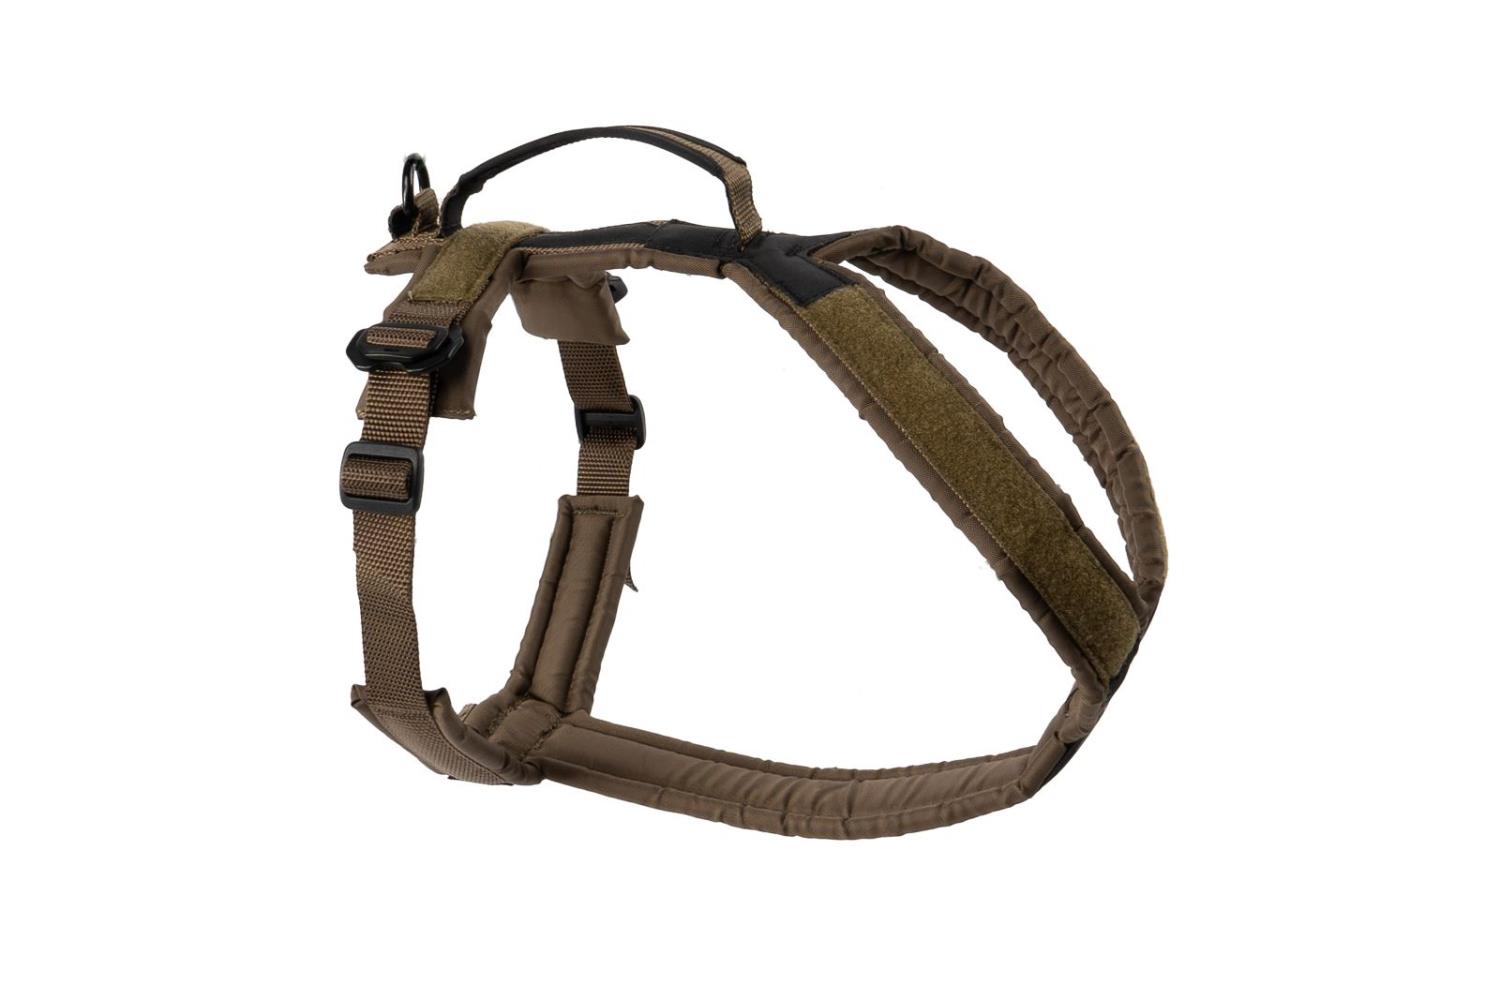 Non-stop Line Harness Grip WD Unisex Olive 5